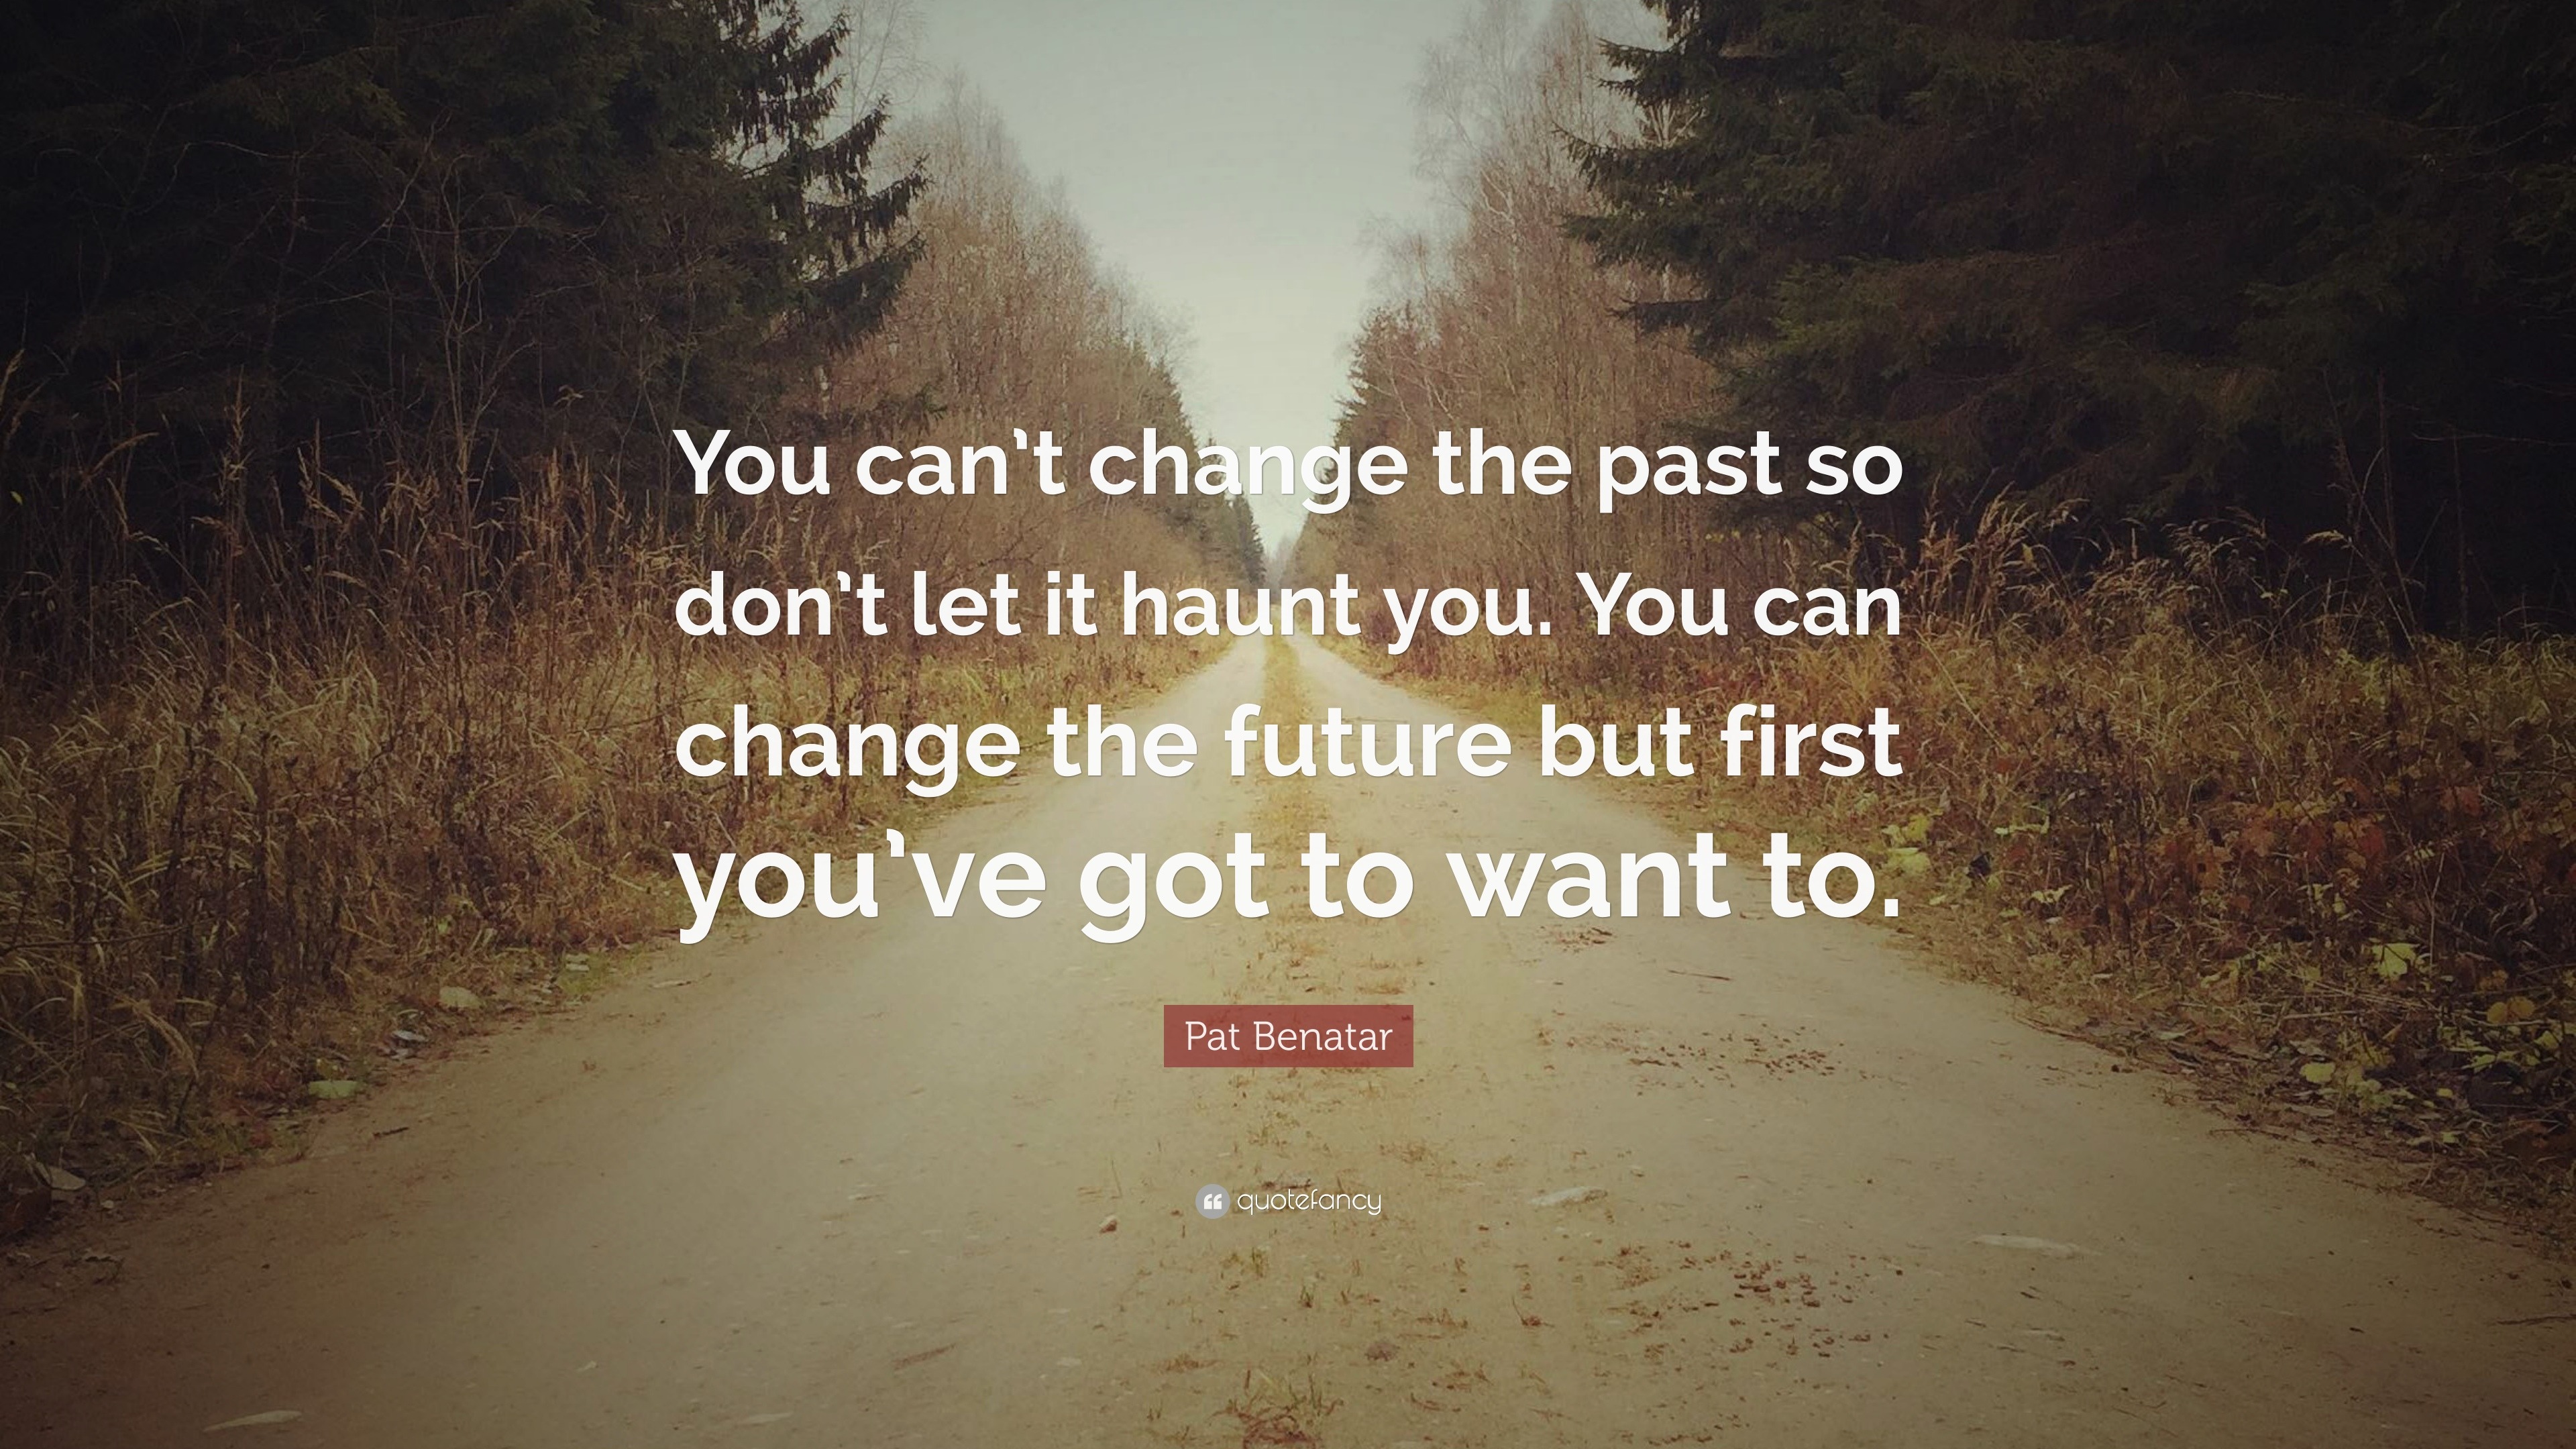 Pat Benatar Quote: “You can’t change the past so don’t let it haunt you ...